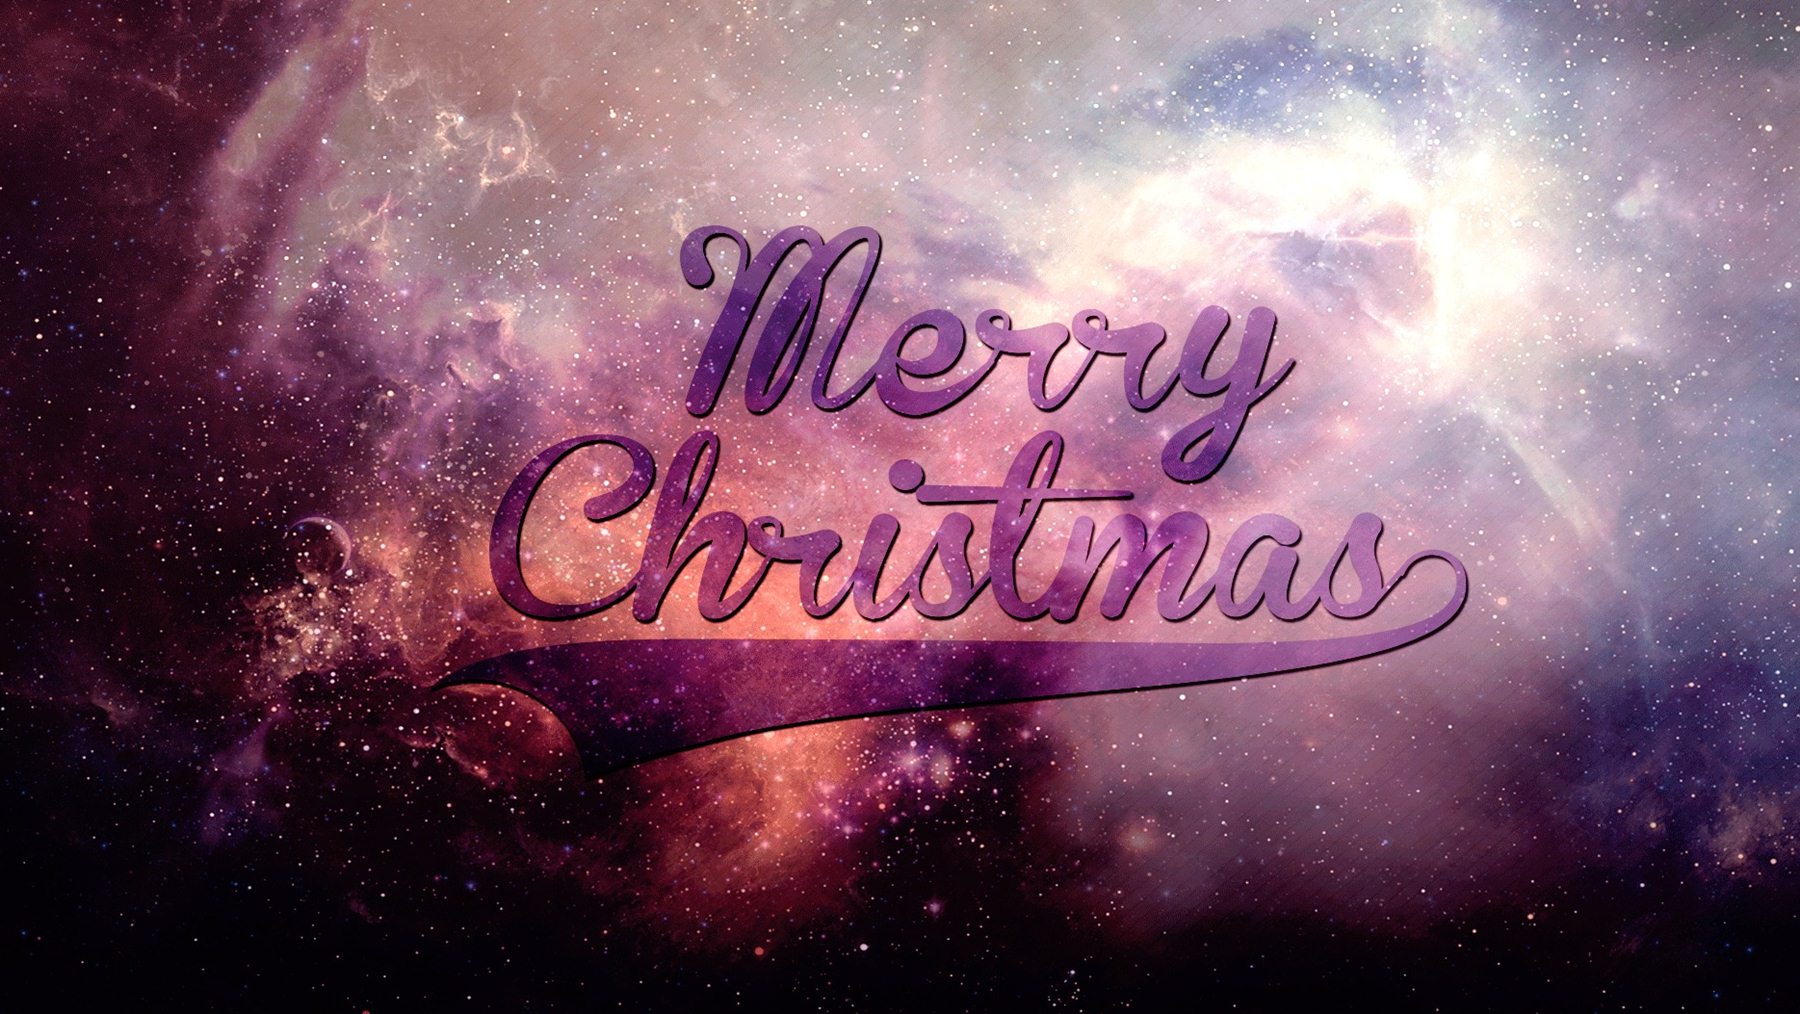 Top Merry Christmas Wishes Image Pics Photos